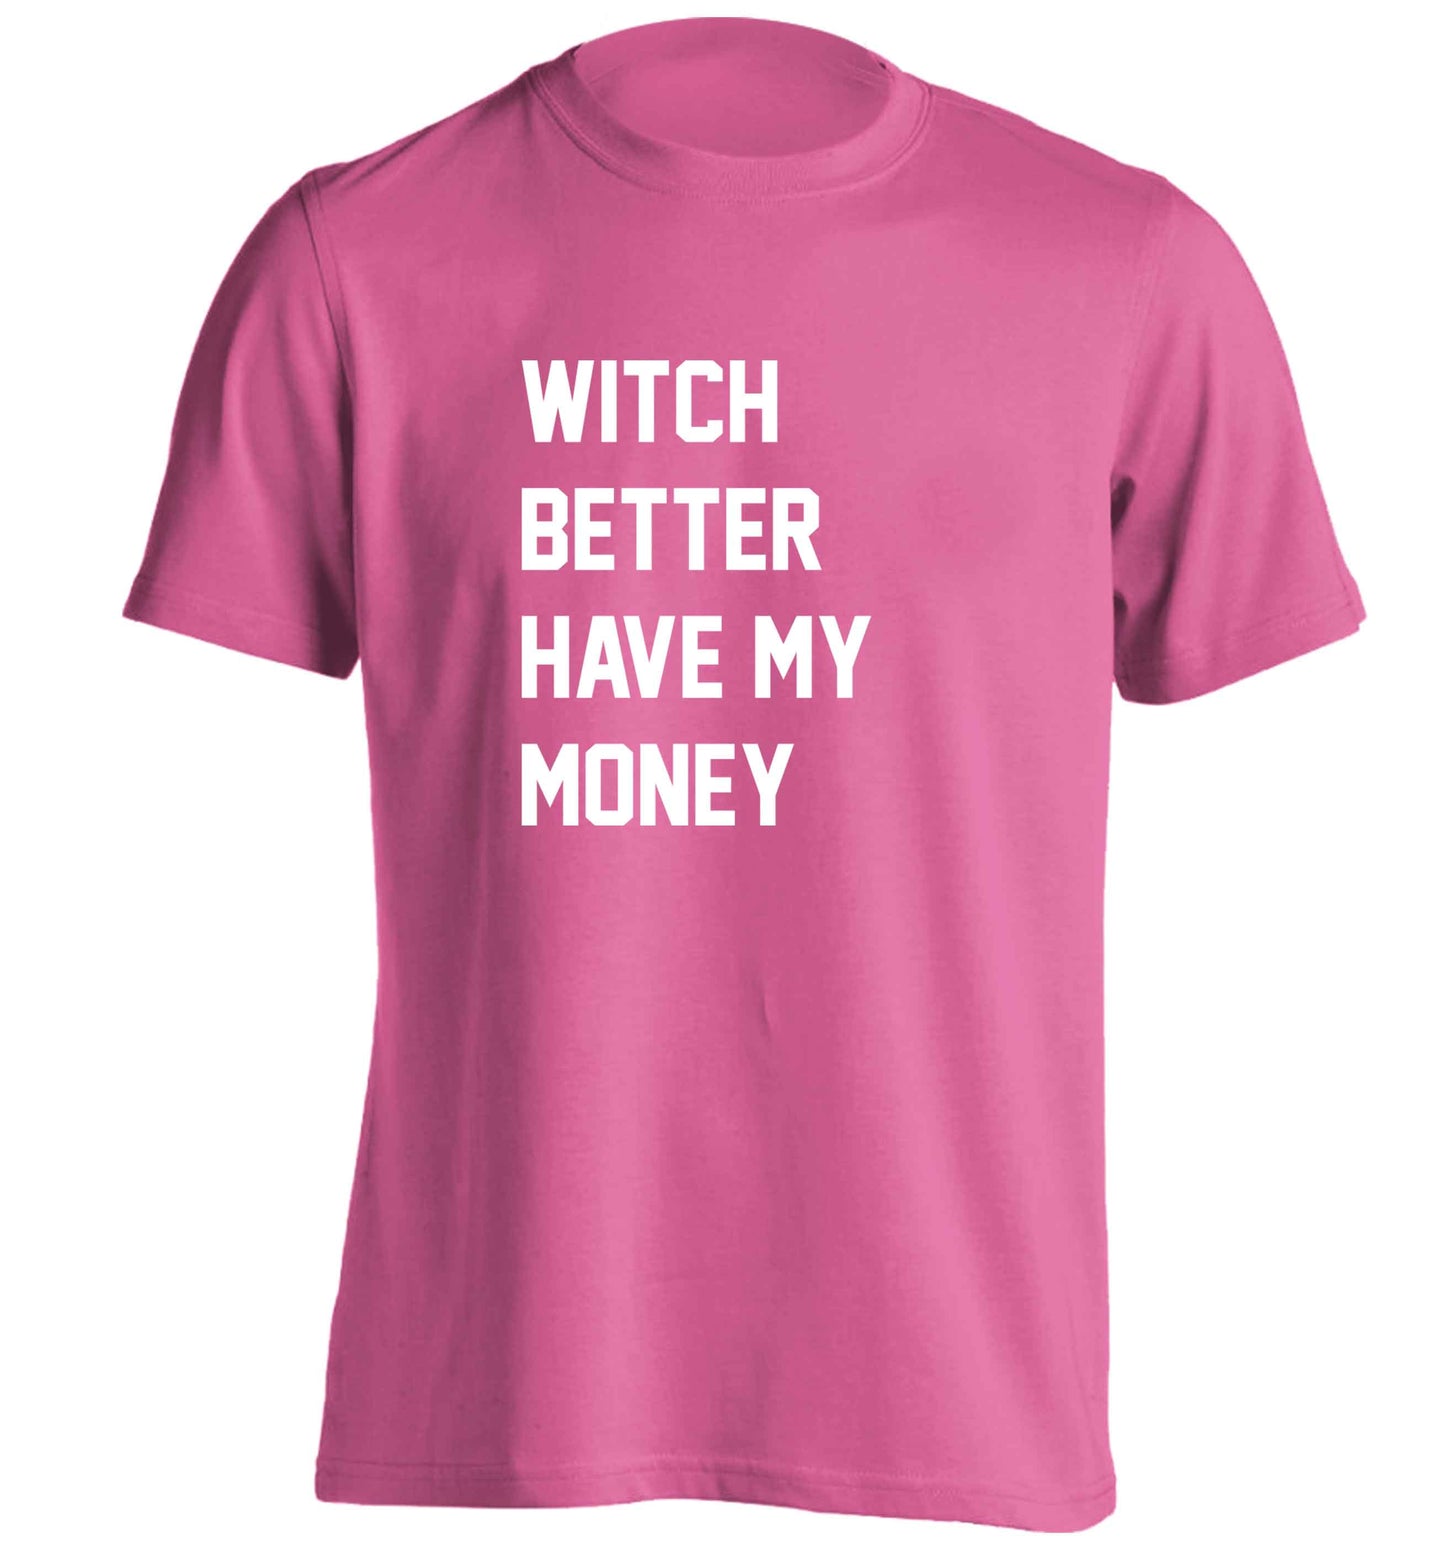 Witch better have my money adults unisex pink Tshirt 2XL